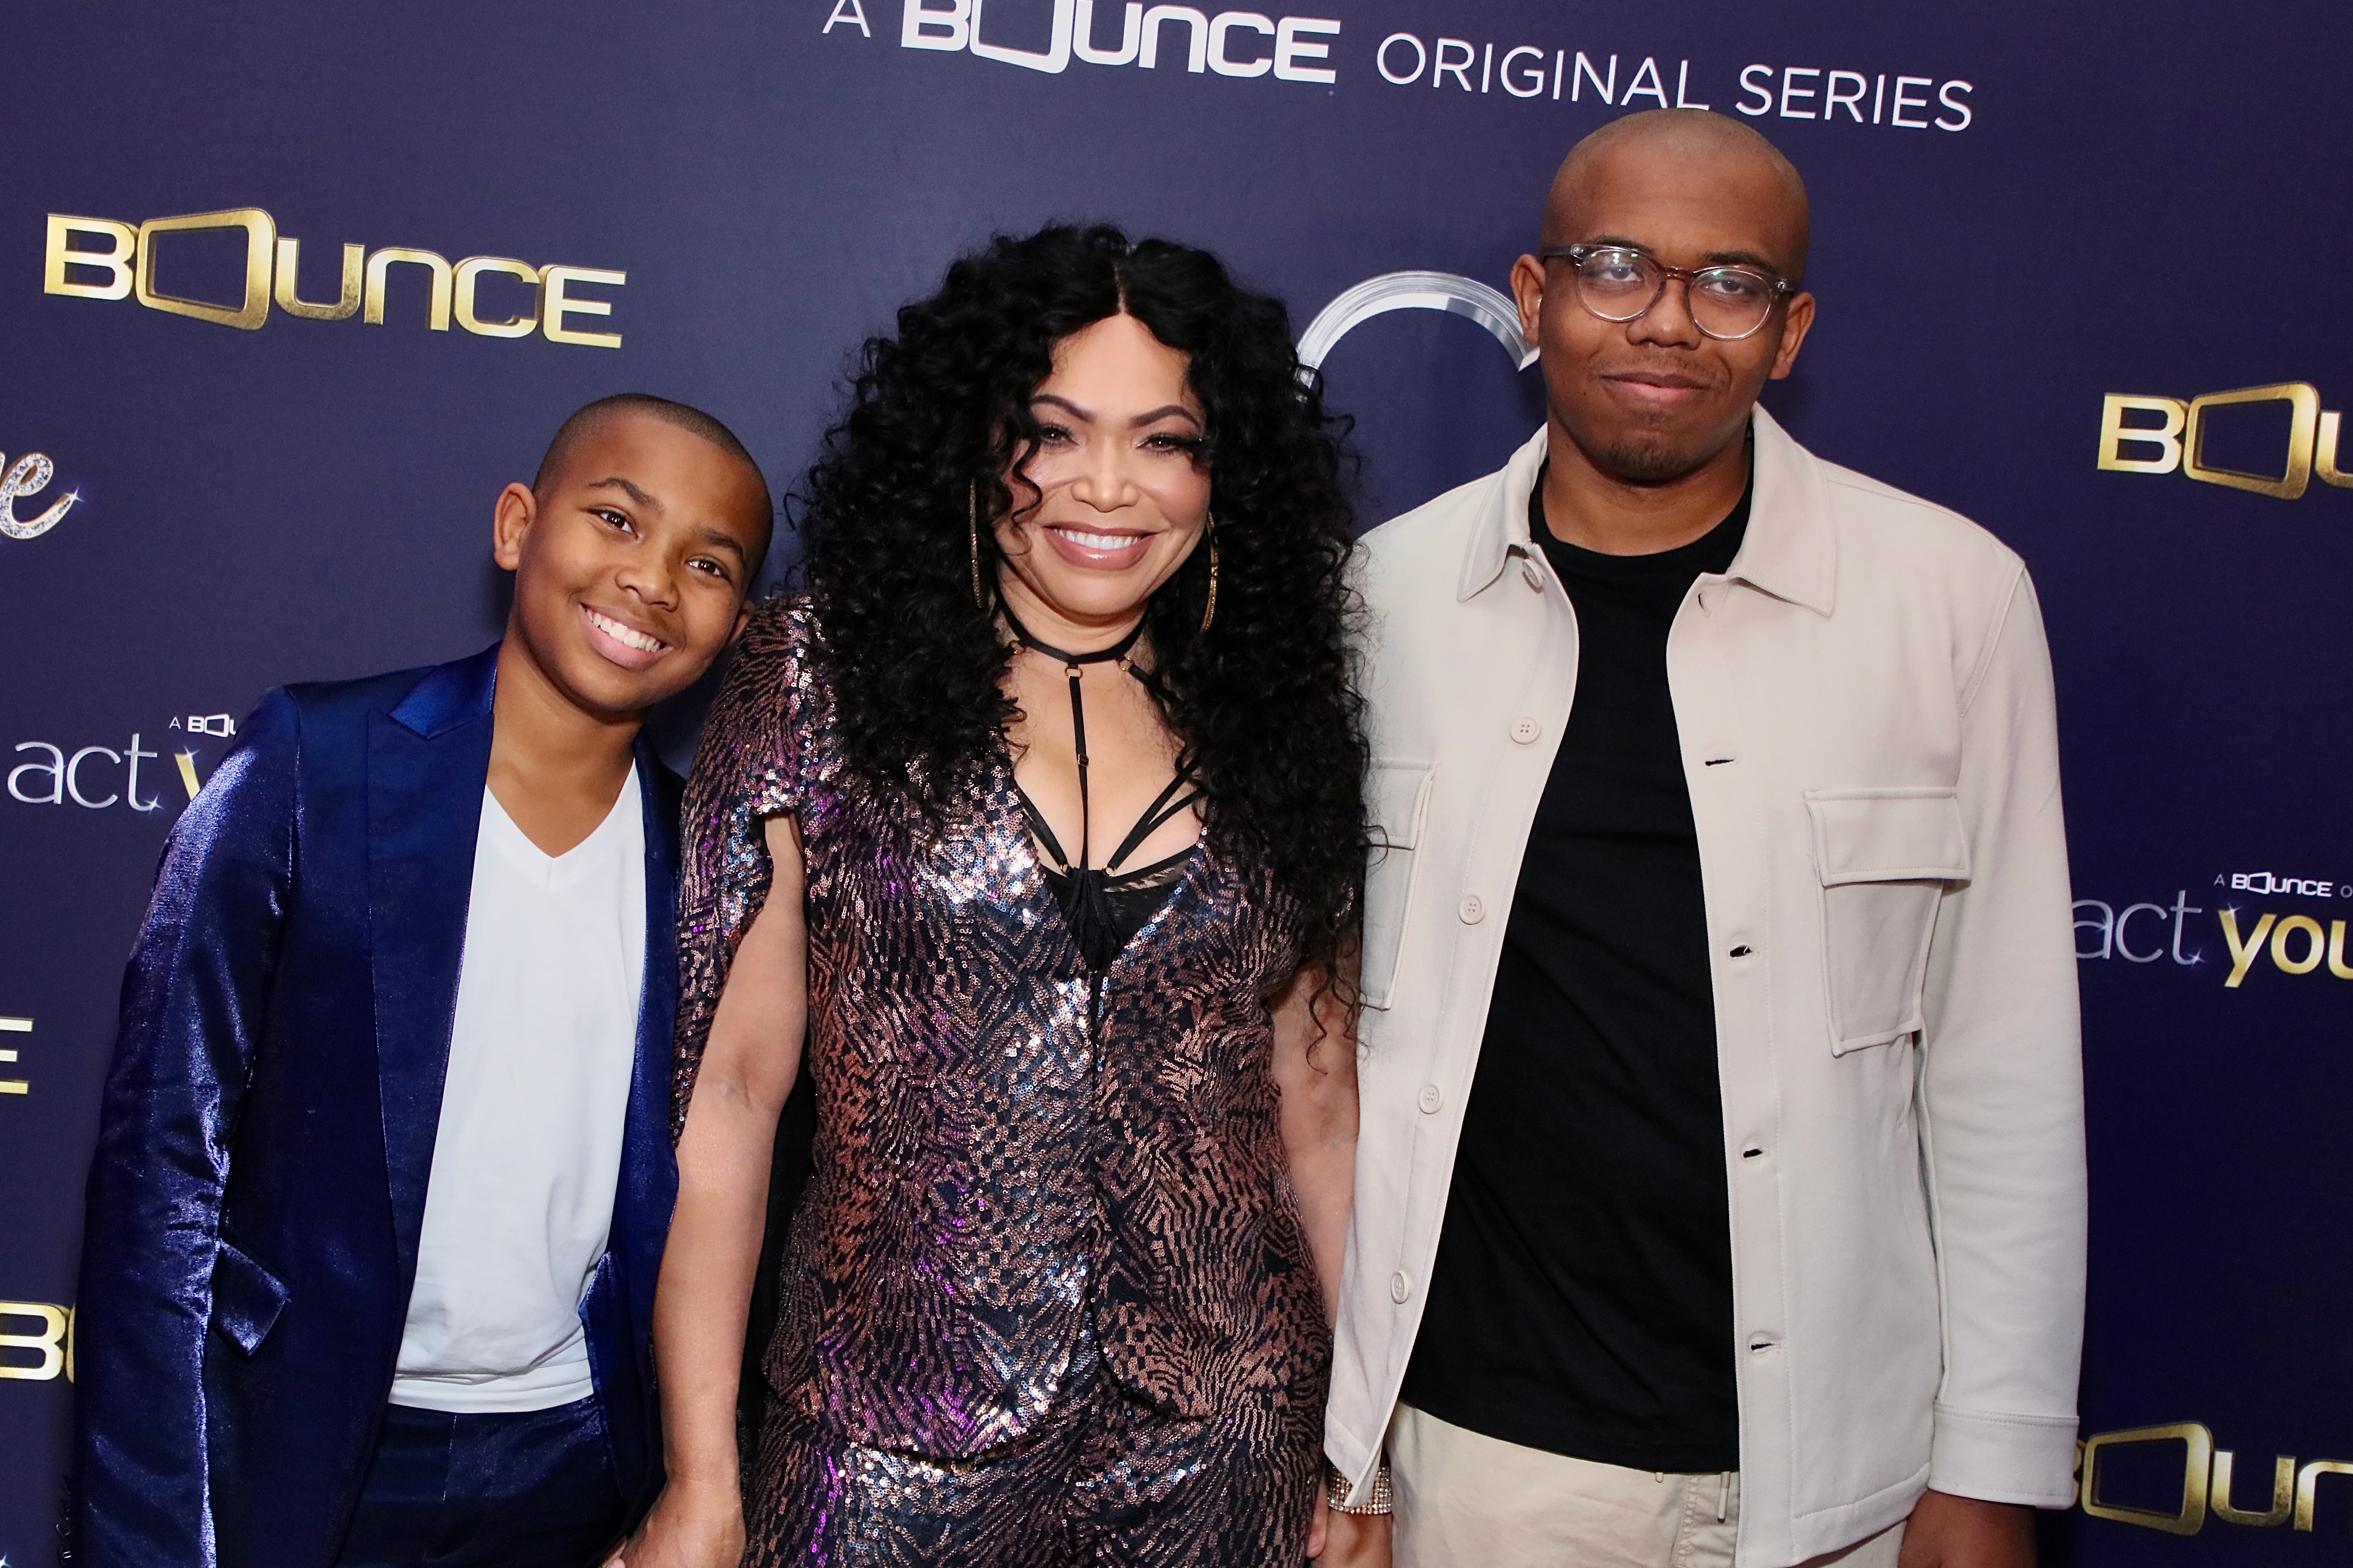 Tisha Campbell and her children Ezekiel Czar and Xen Martin at the official premiere screening of "Act Your Age" on February 27, 2023, in West Hollywood, California | Source: Getty Images